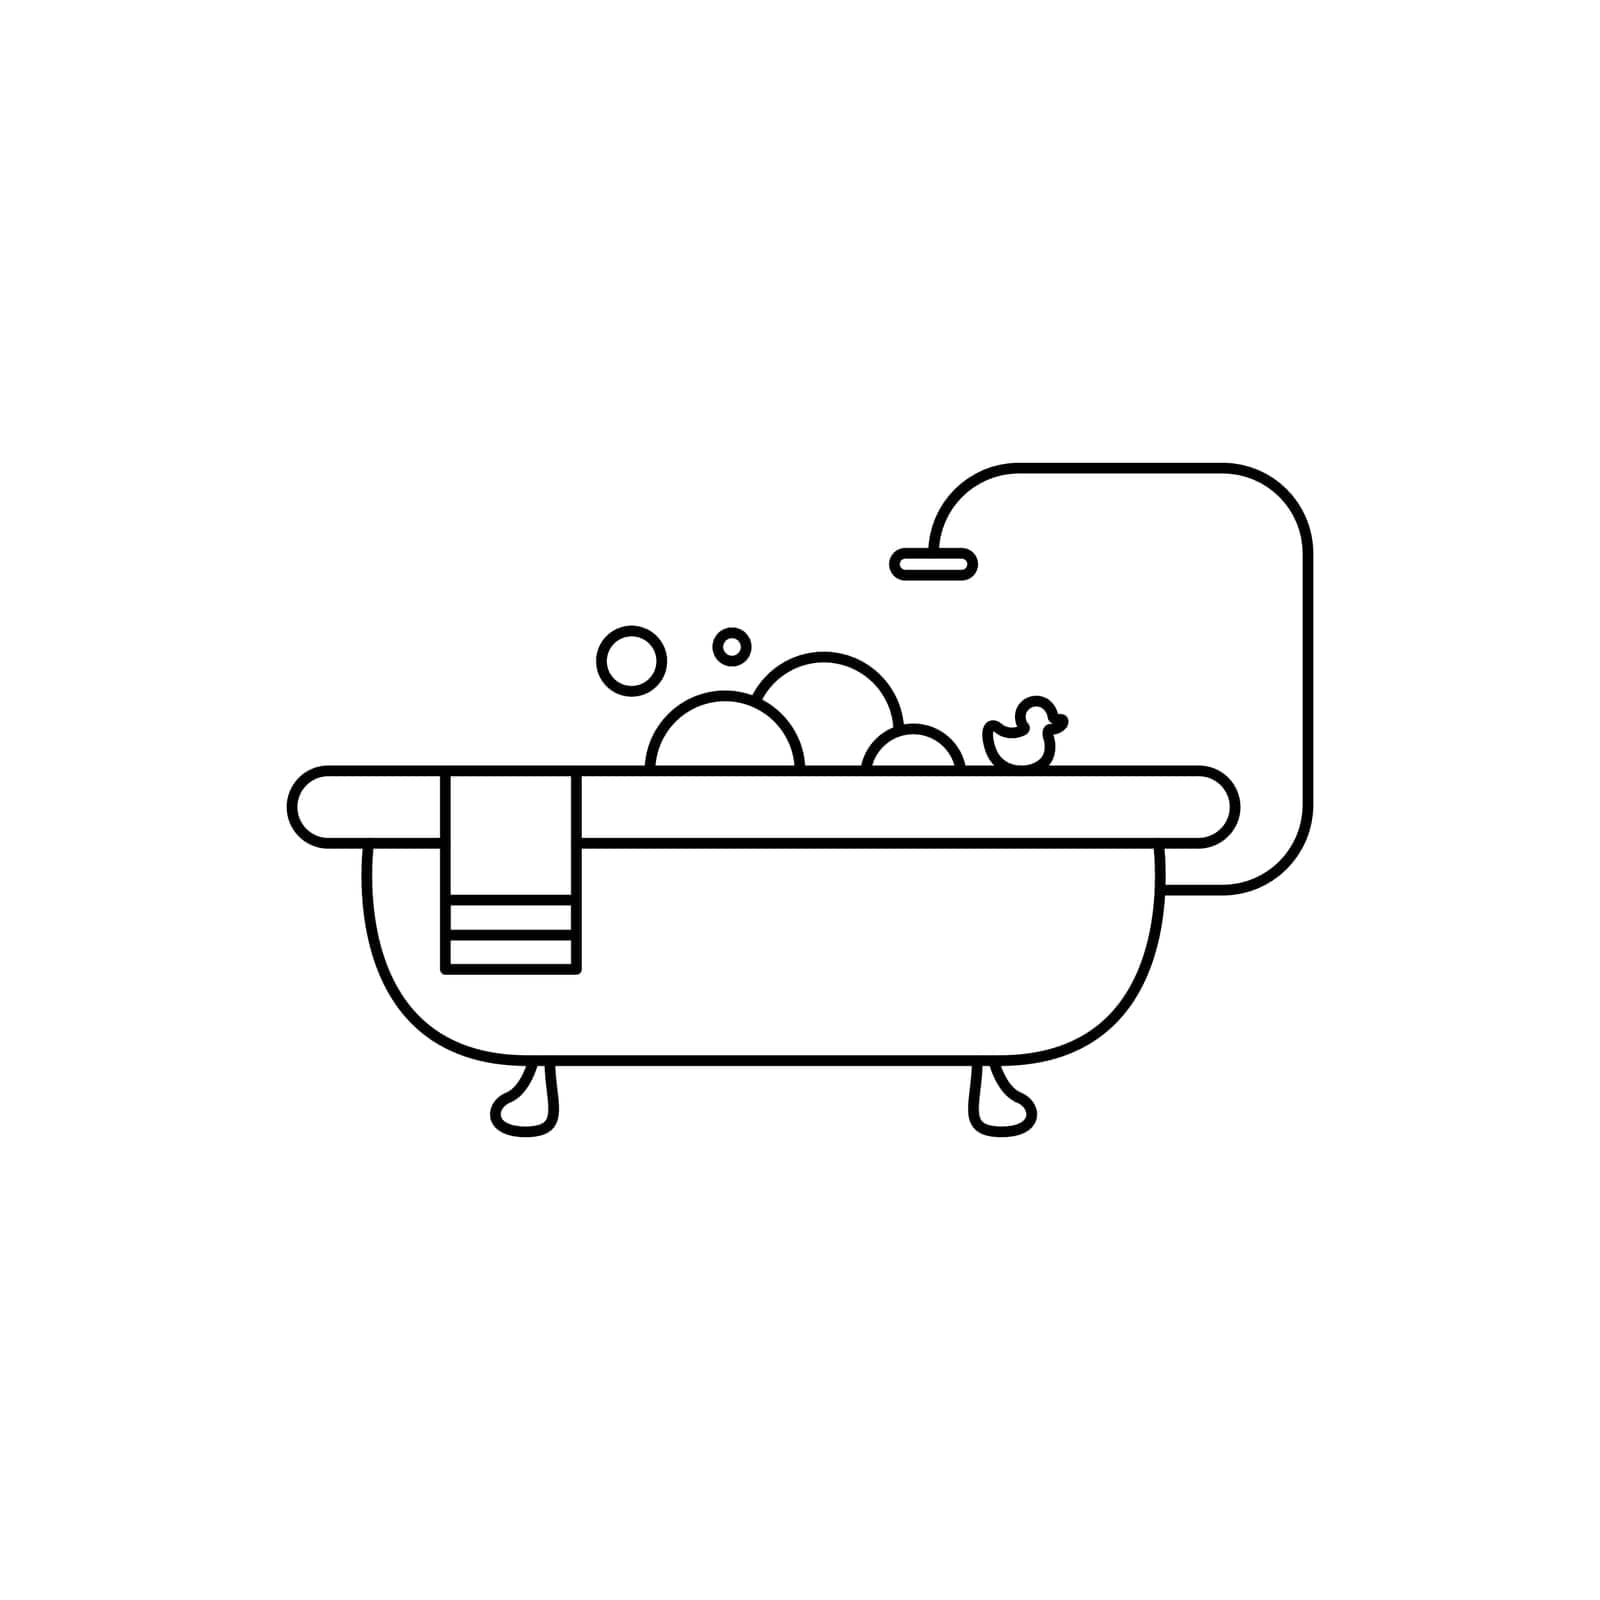 Shower logo concept. Outline of a cute bathtub in a simple flat style. Cleanliness vector icon. Home interior for bathroom vector. Vector illustration.